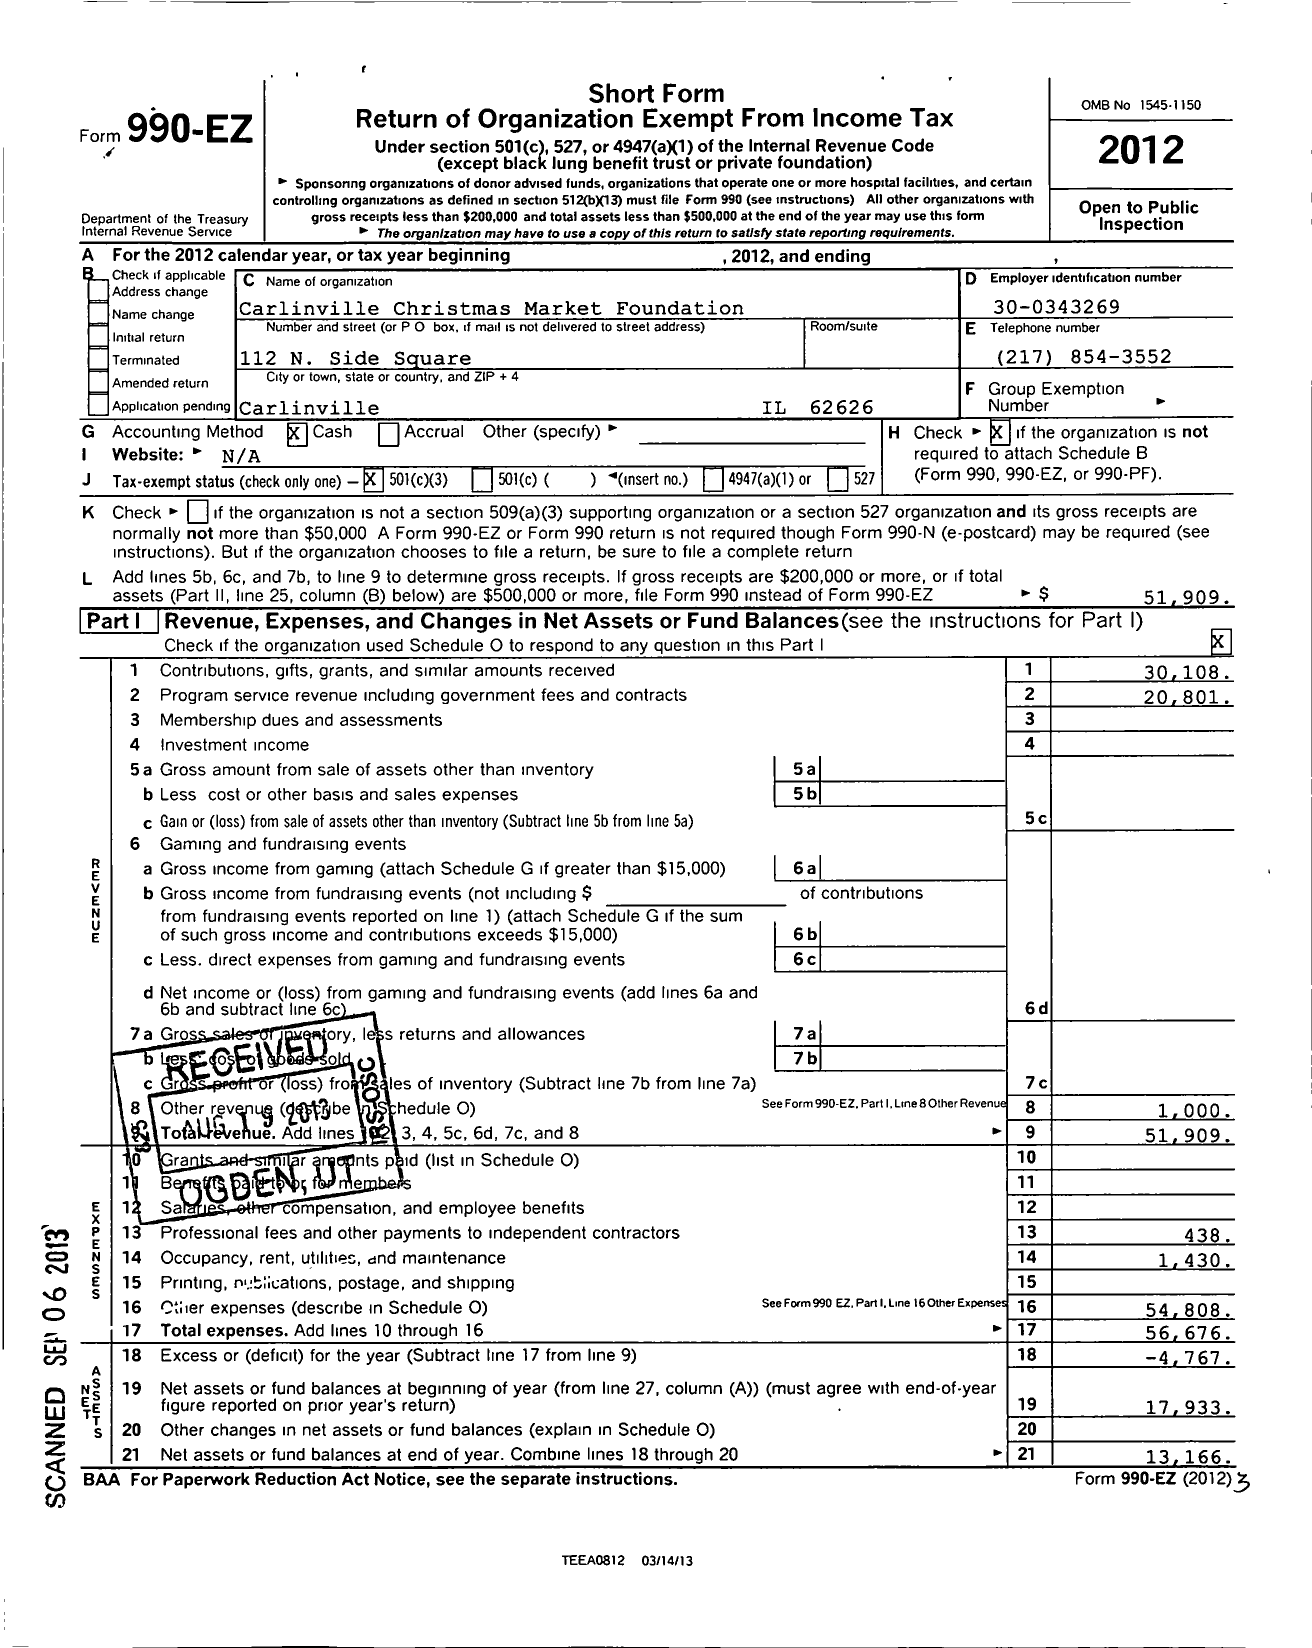 Image of first page of 2012 Form 990EZ for Carlinville Christmas Market Foundation